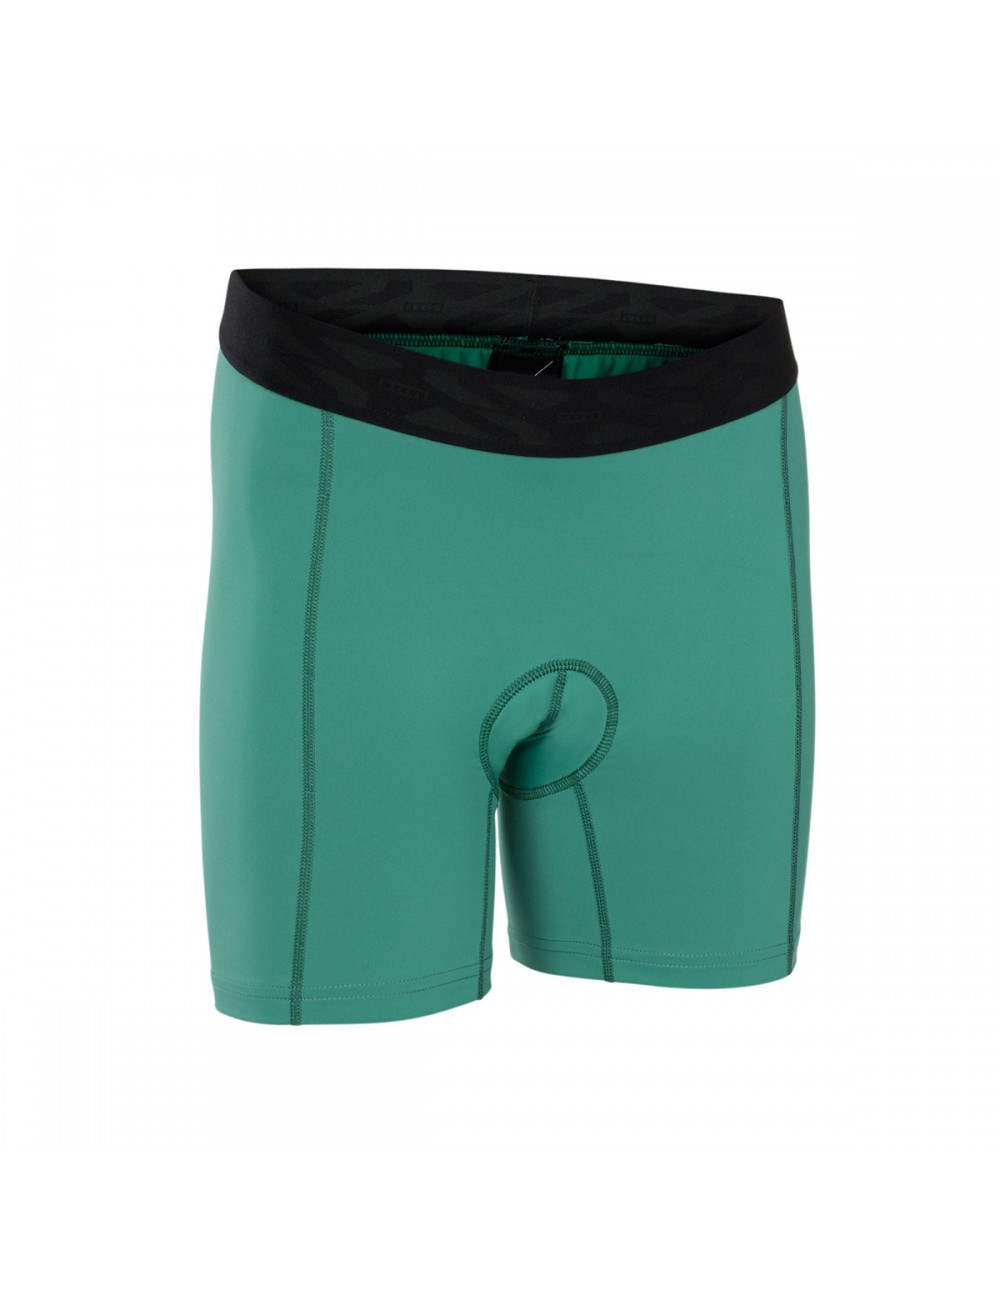 ION In Shorts - Sea Green